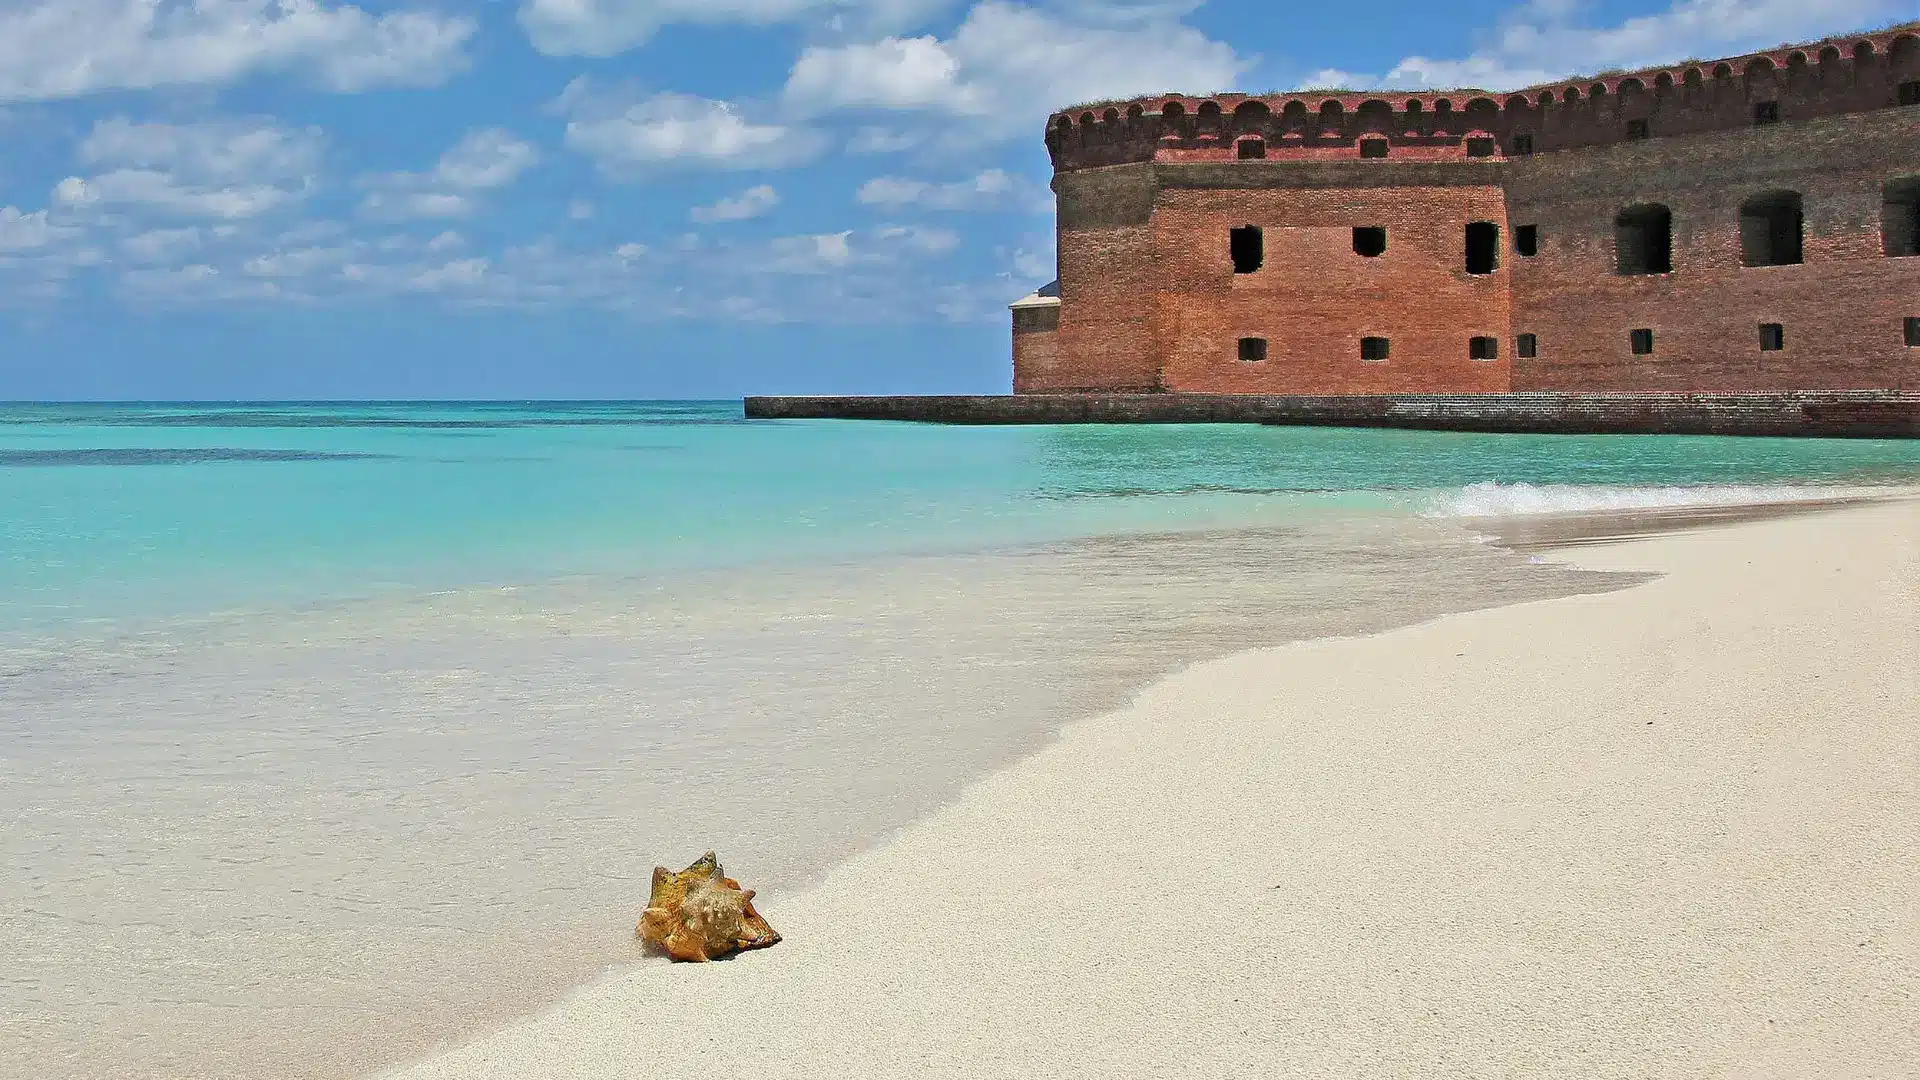 A sandy beach beside turquoise waters at Fort Jefferson